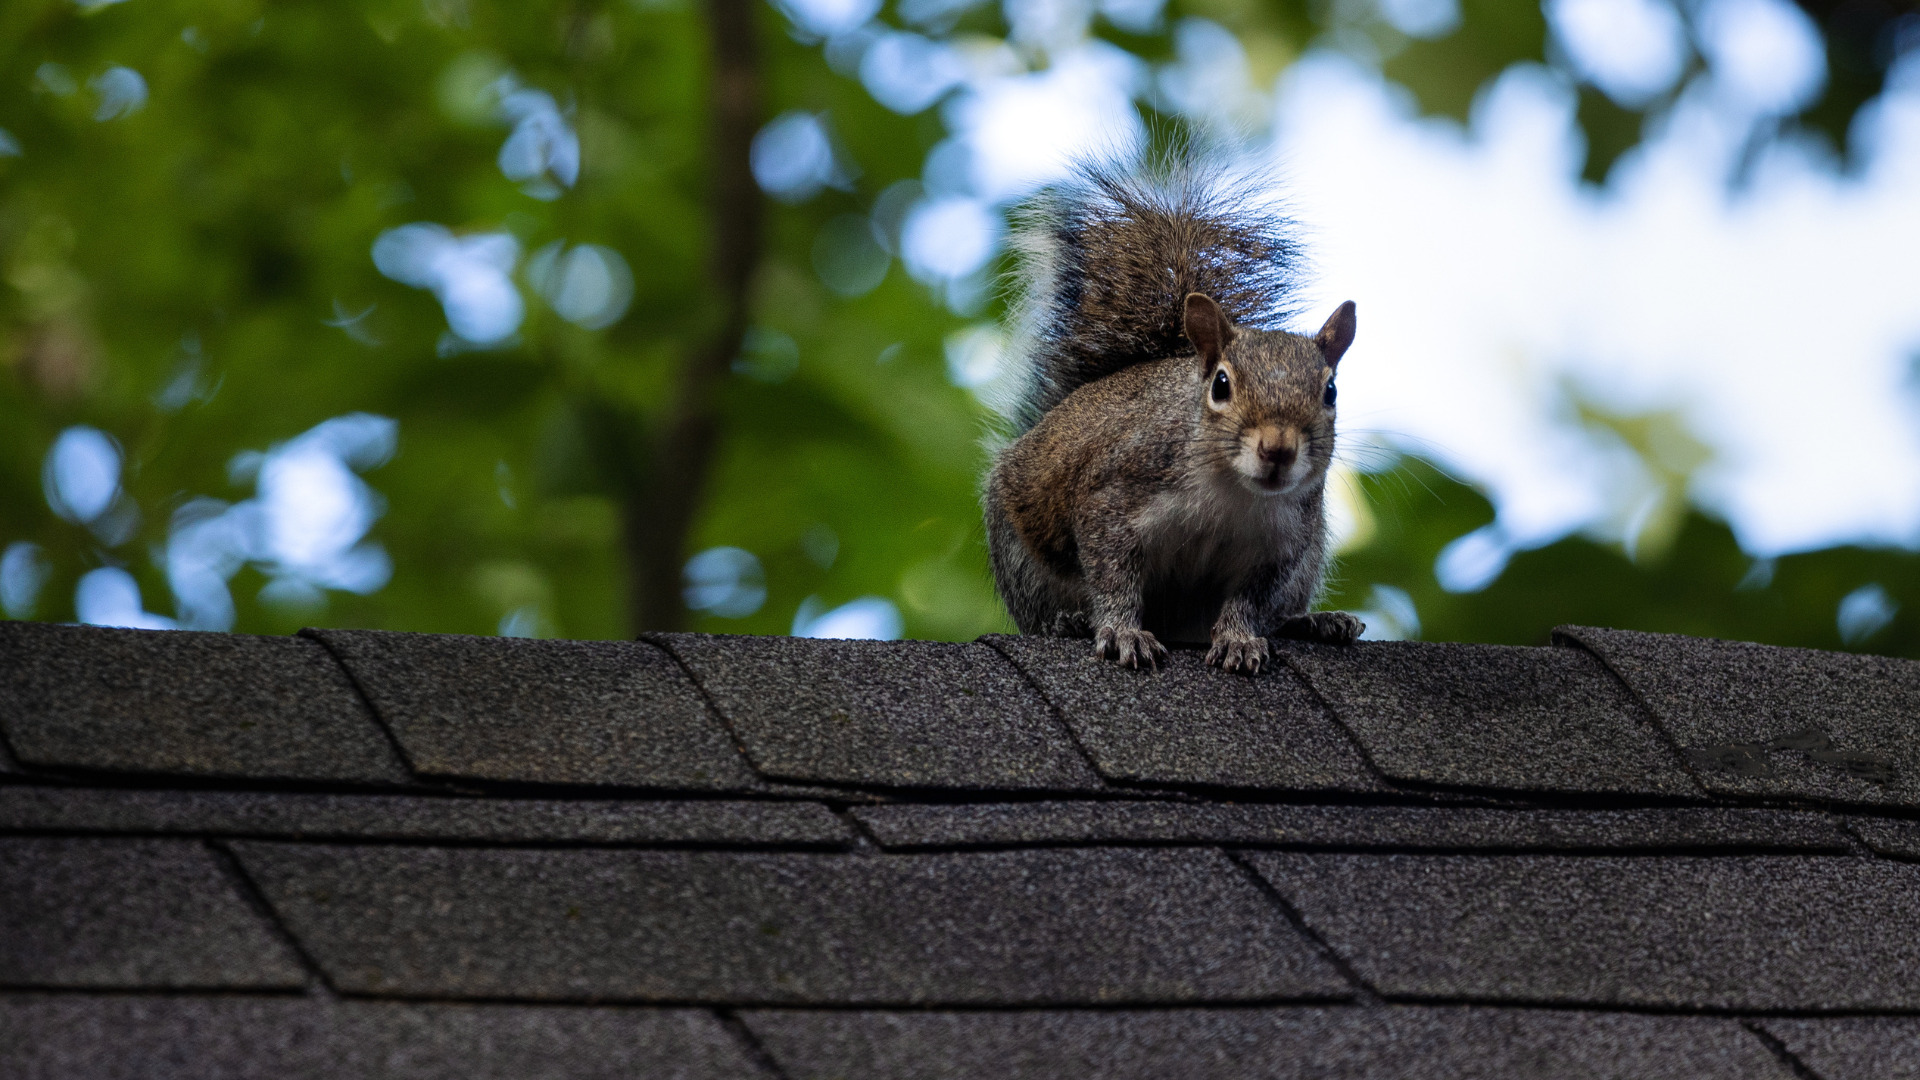 Protect you home's roof from squirrel damage with Best Choice Roofing.